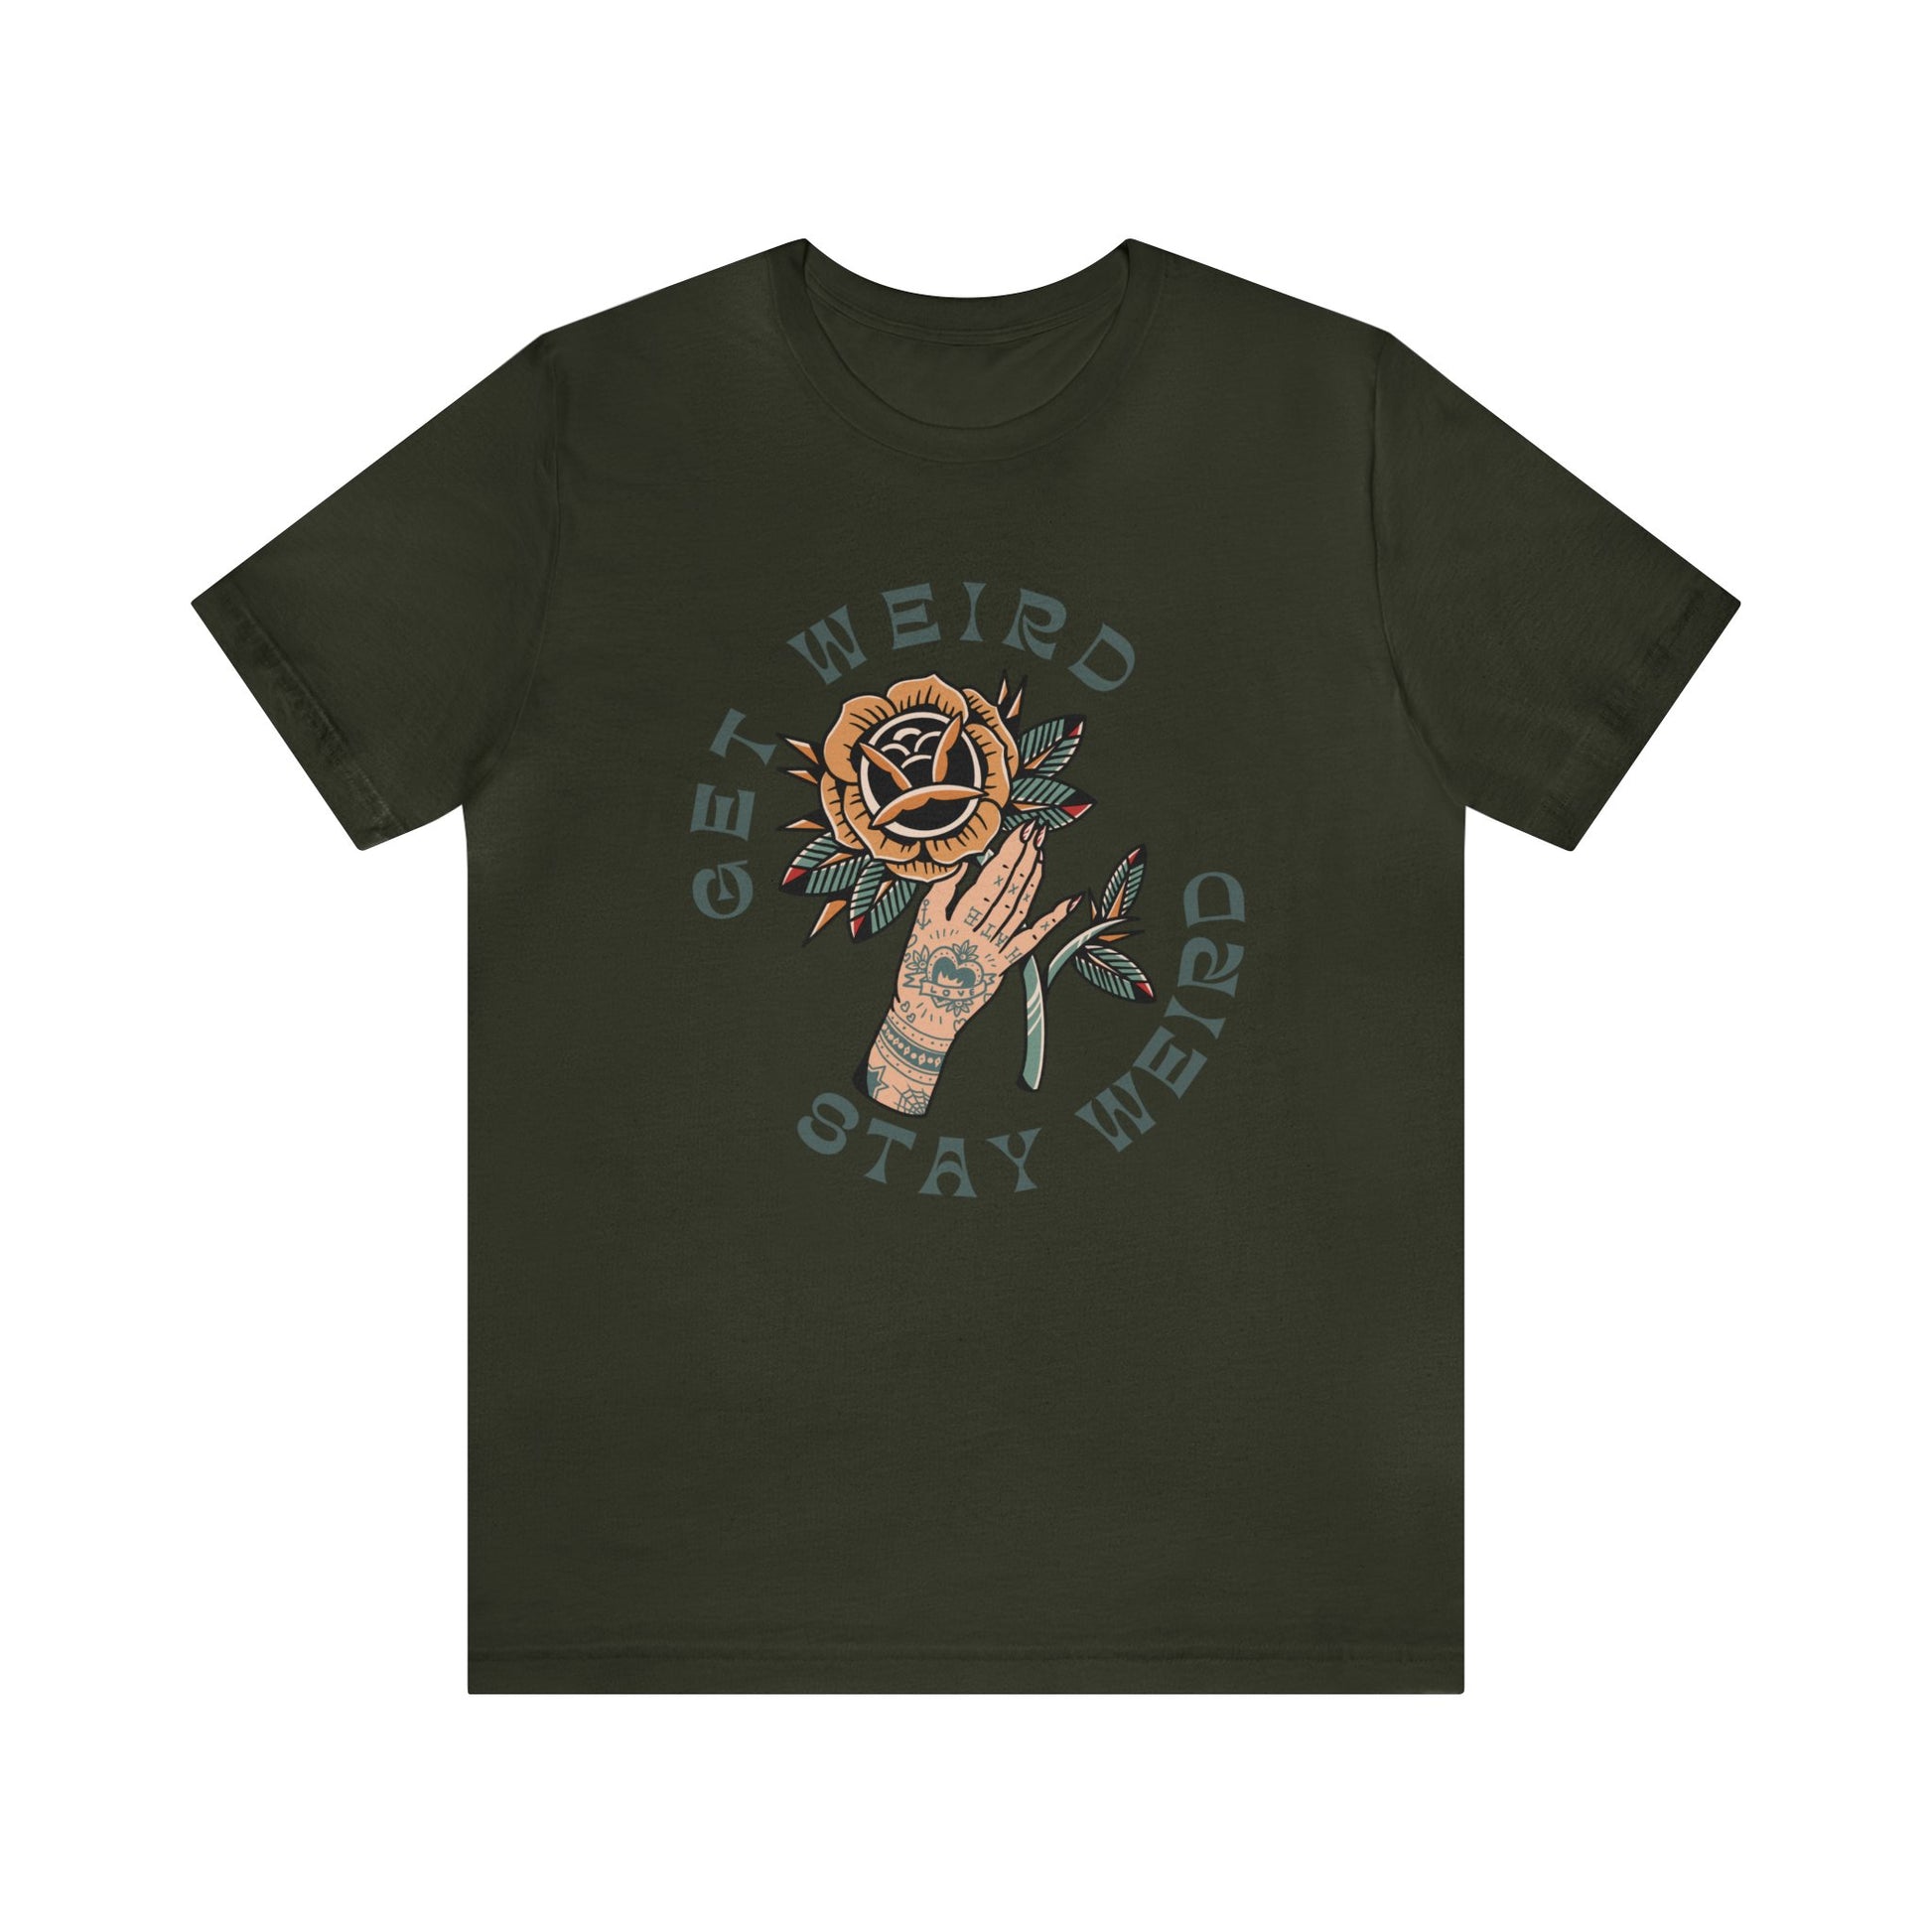 Get Weird Stay Weird Tattoo T-shirt / Tattooed Hand With Rose Unisex Vintage Traditional Tattoo Tee Shirt / Punk Rock Clothing Tshirt - Foxlark Crystal Jewelry